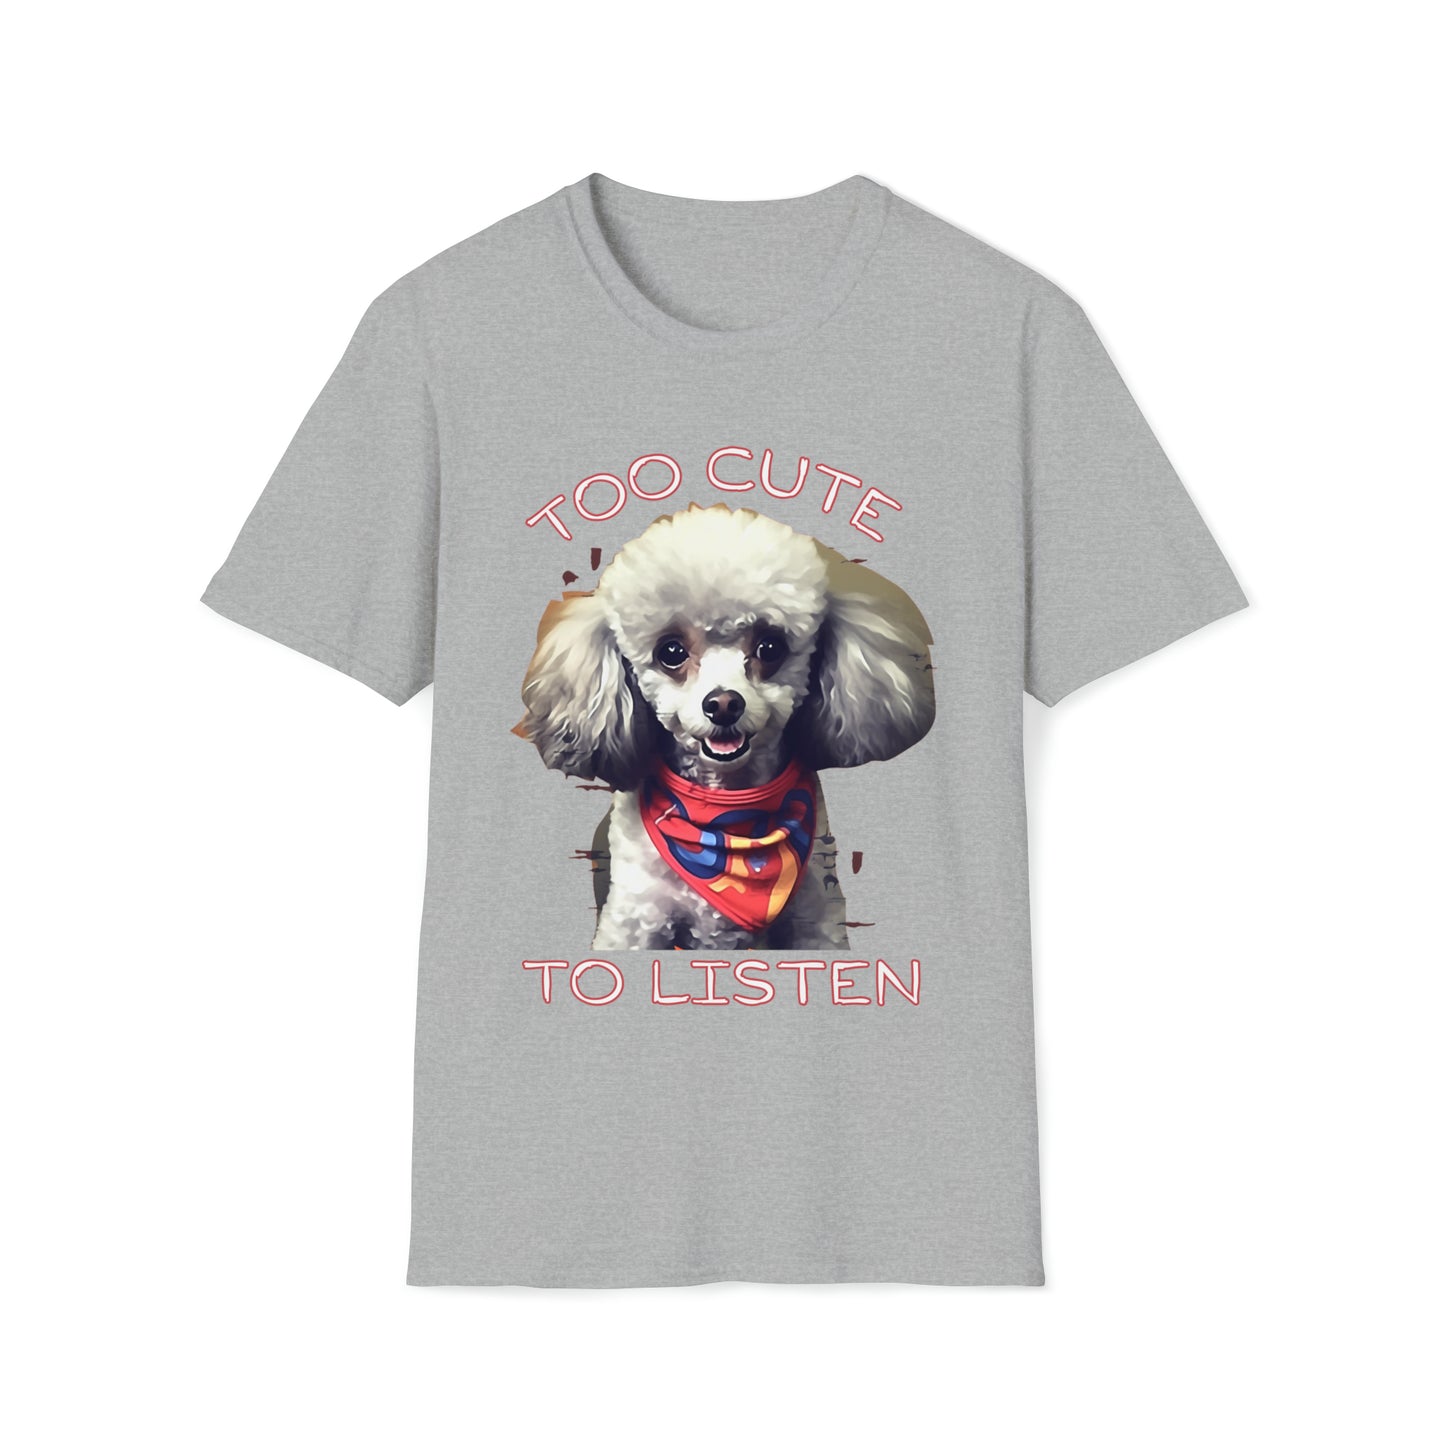 "Too Cute to Listen" Dog Unisex Softstyle T-Shirt